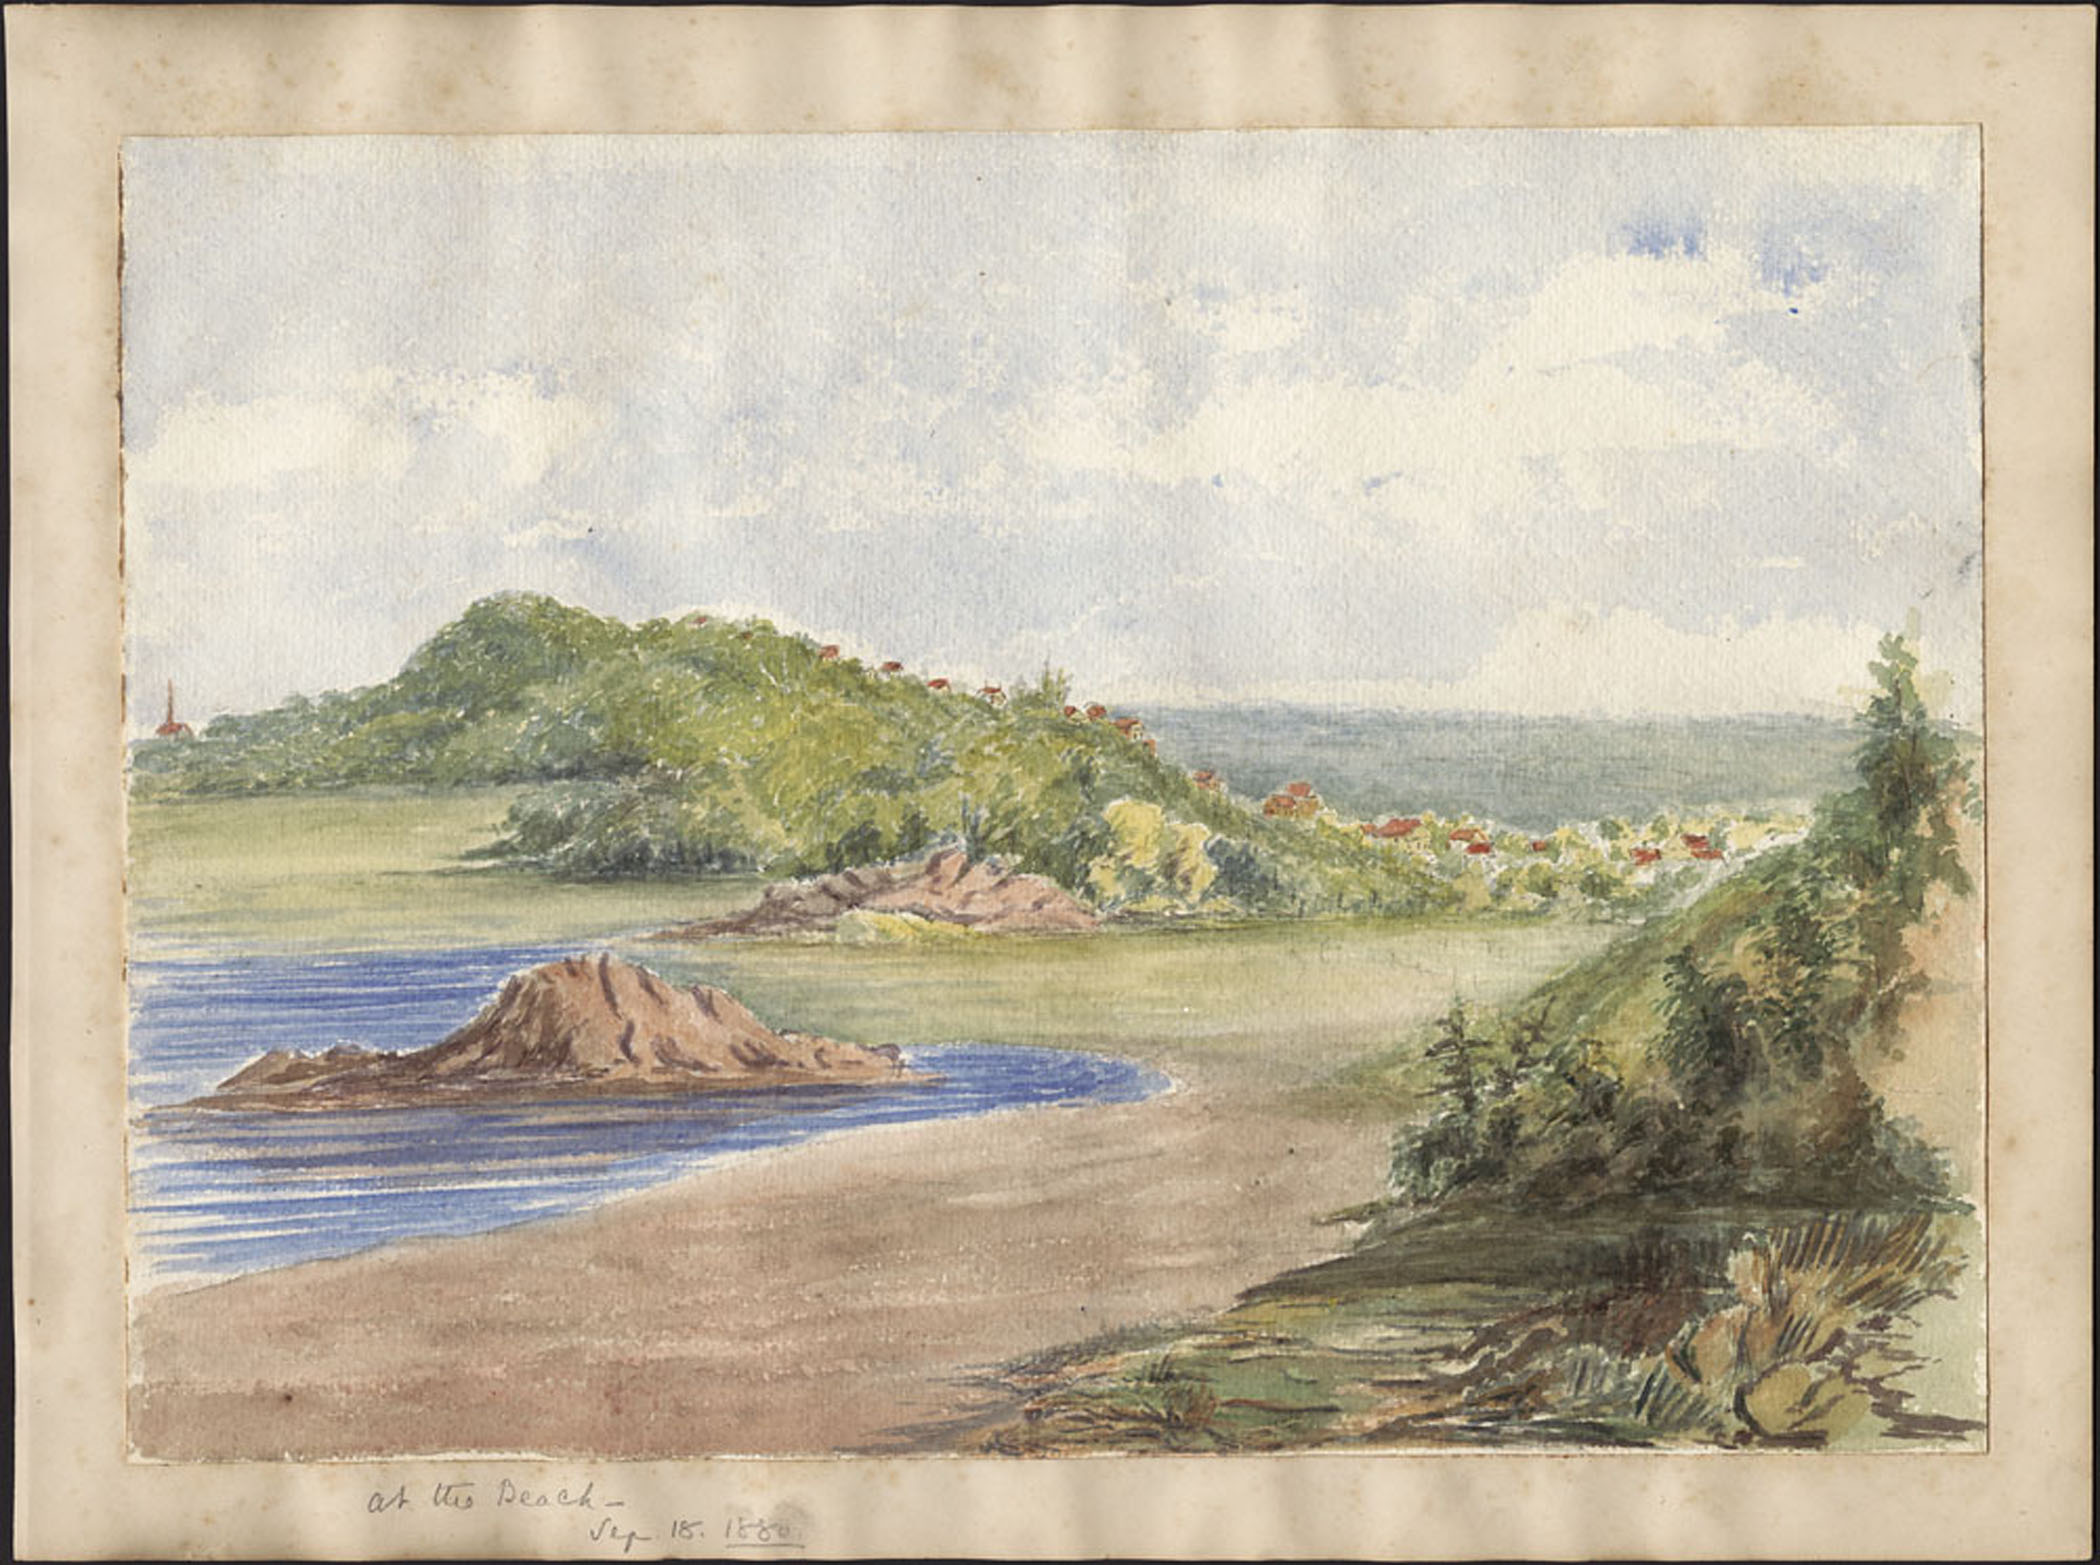 A watercolour image of a gentle shoreline scene, with a little water lifting upon a crescent-shaped beach, some vegetation in the foreground and what might be flowers visible amongst the vegetation in the background.